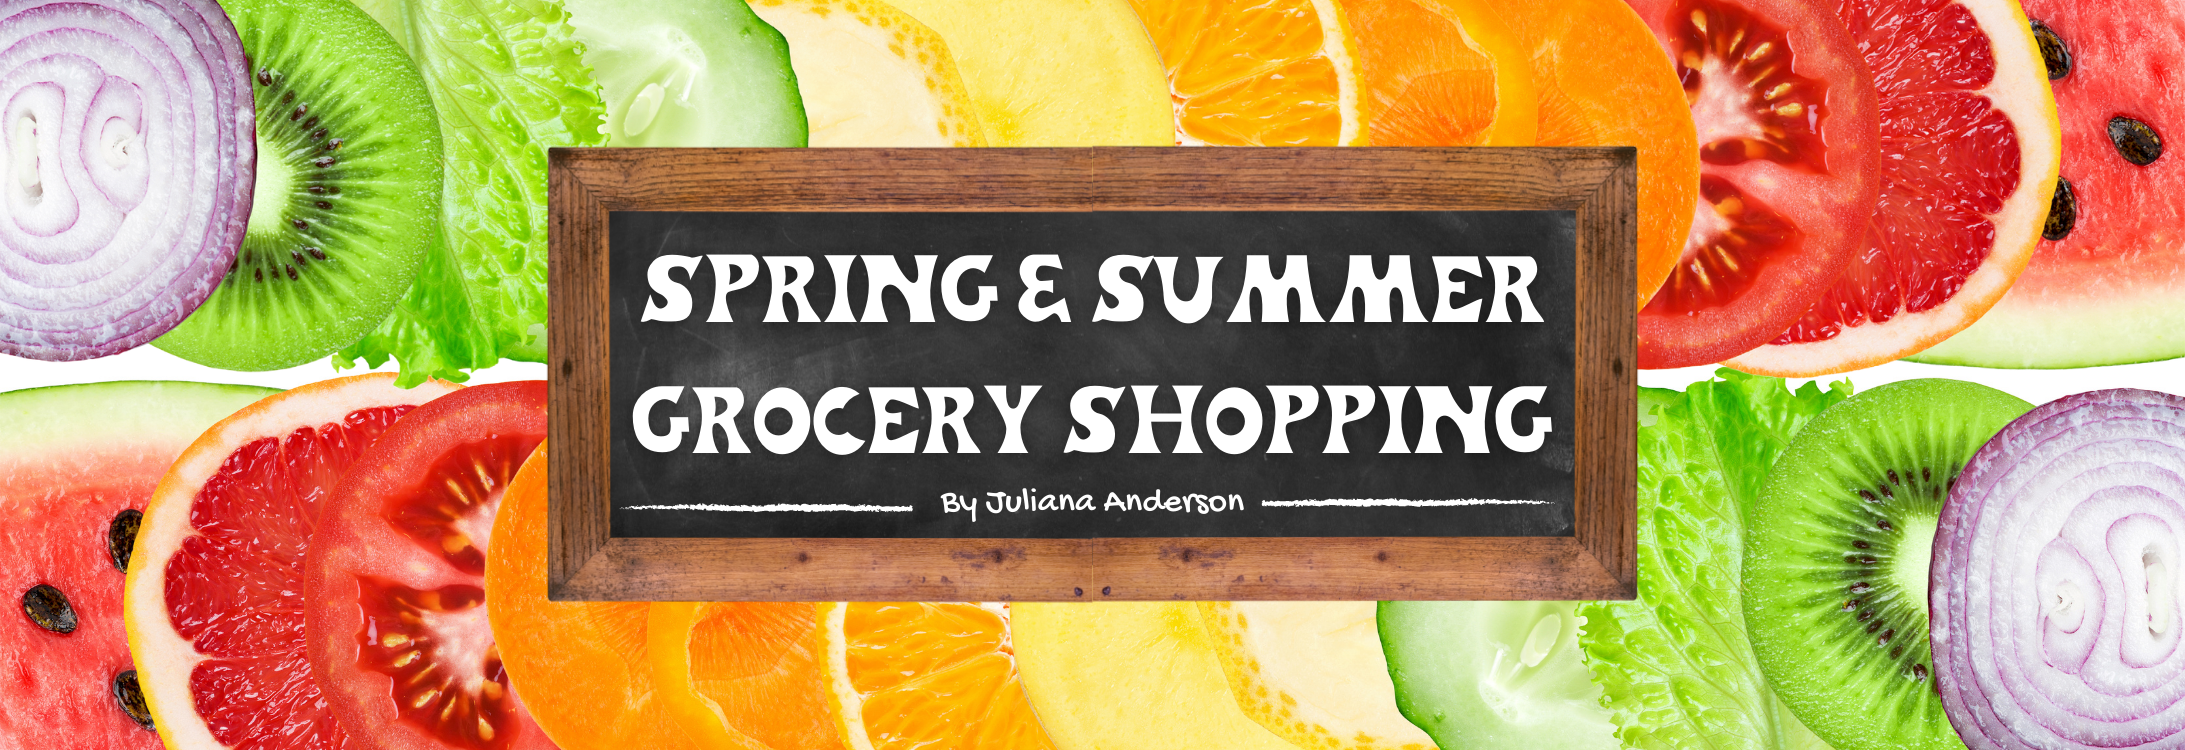 Spring & Summer Grocery Shopping blog cover